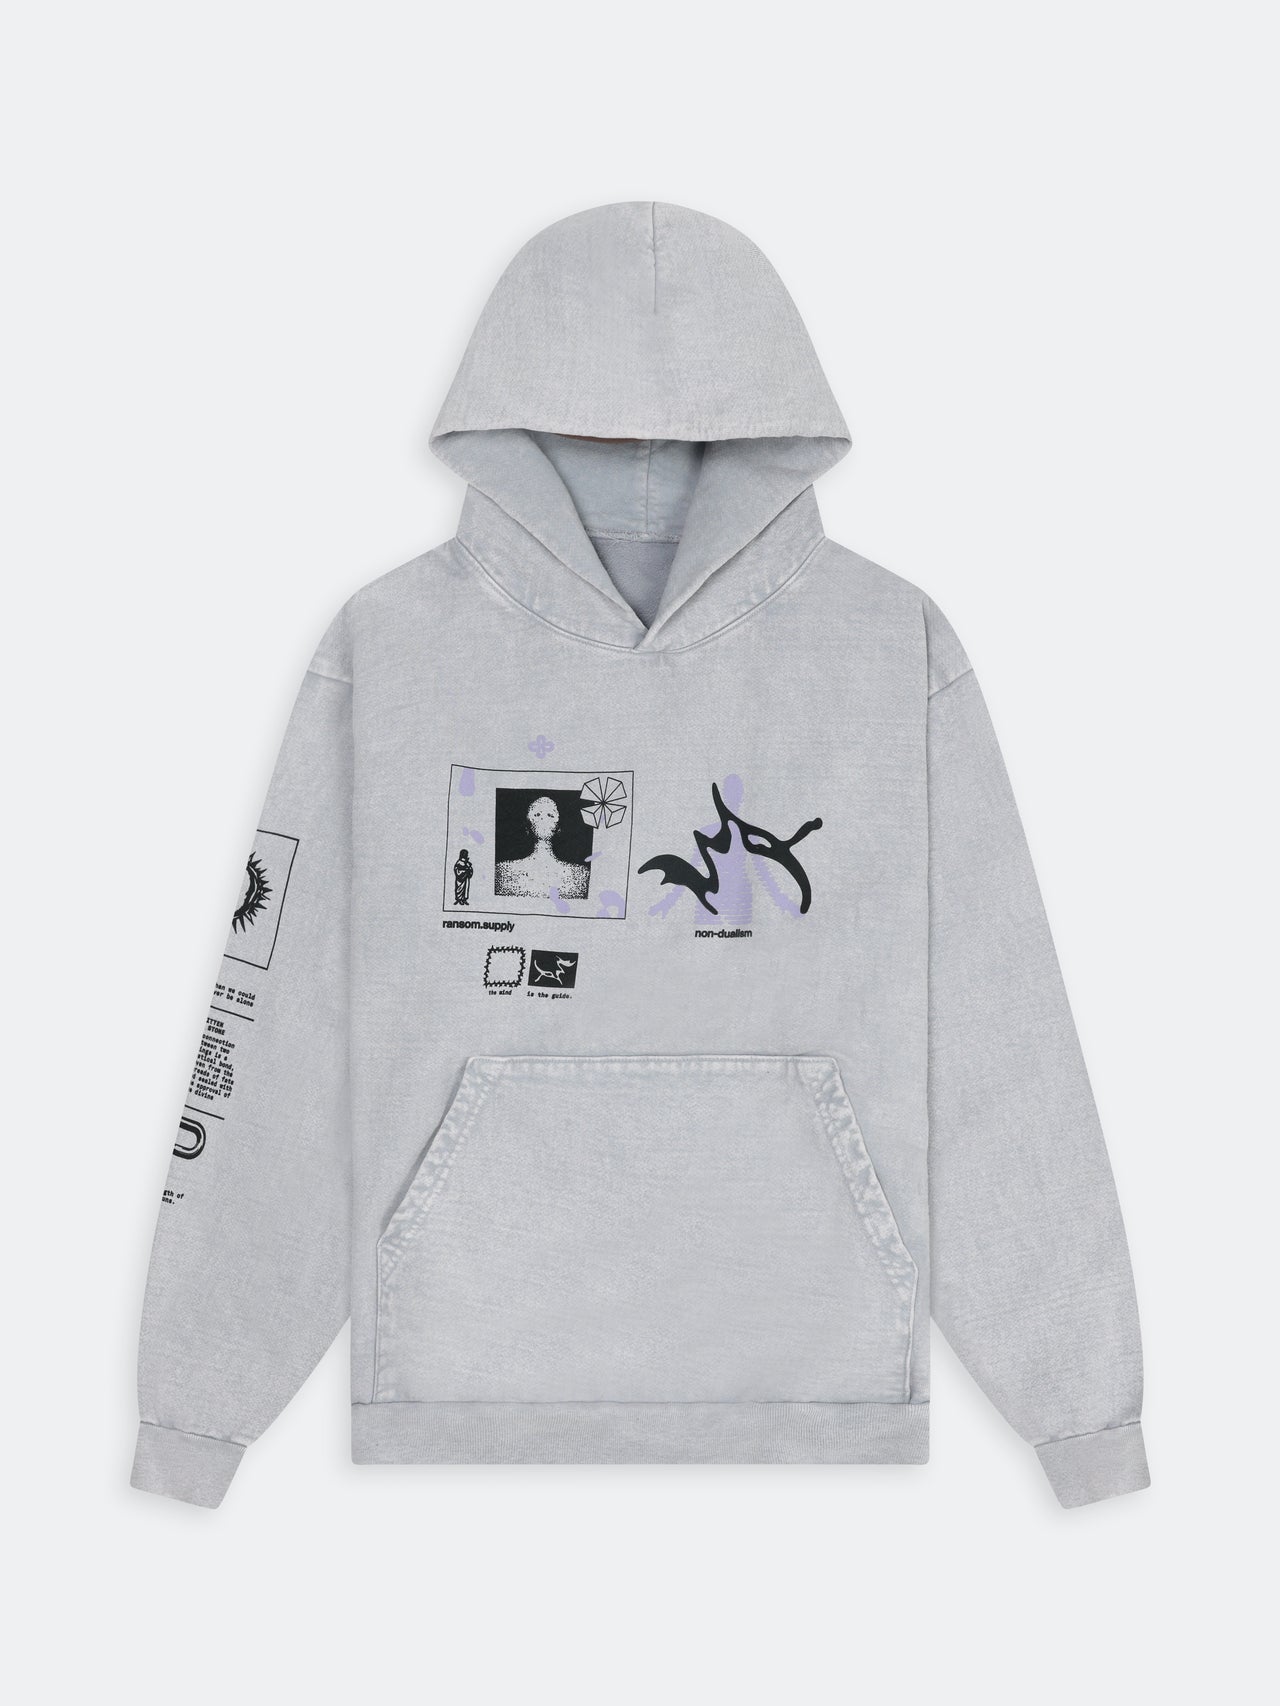 Non-Dualism Hoodie - Ice Grey